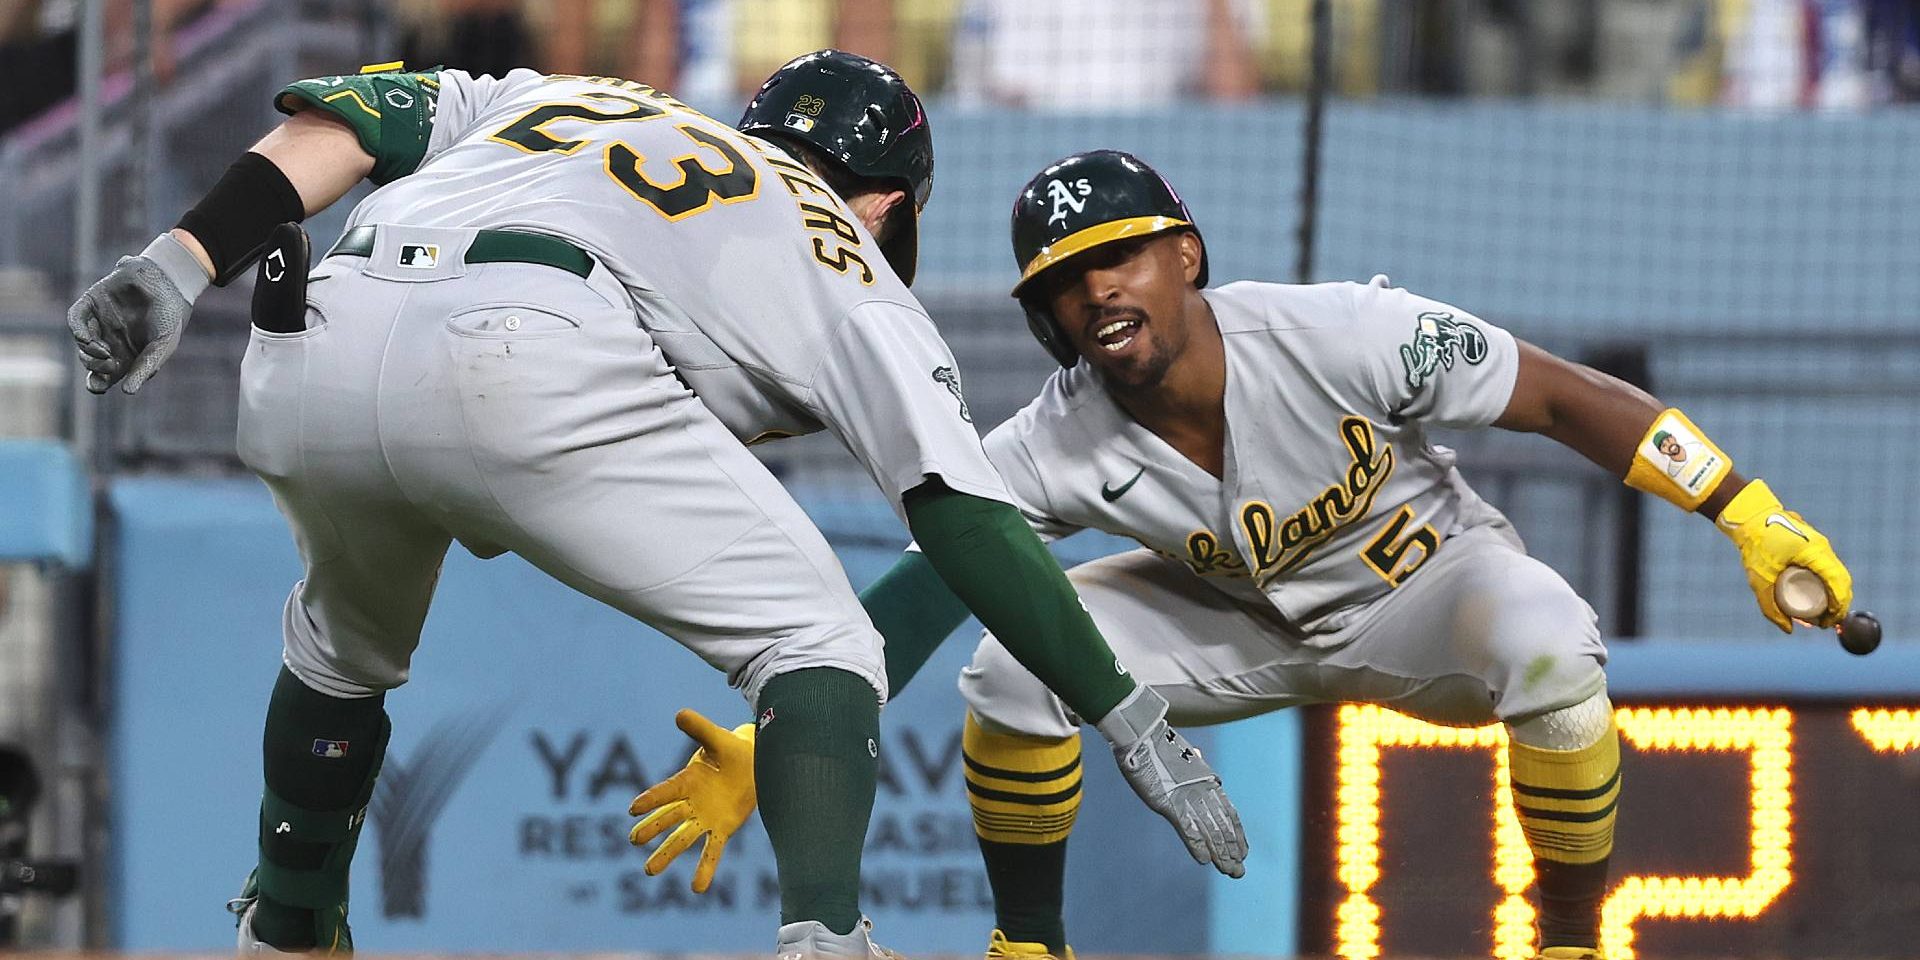 Oakland's Tony Kemp, fresh off paternity list, offers leadership, perspective during rough season for A's